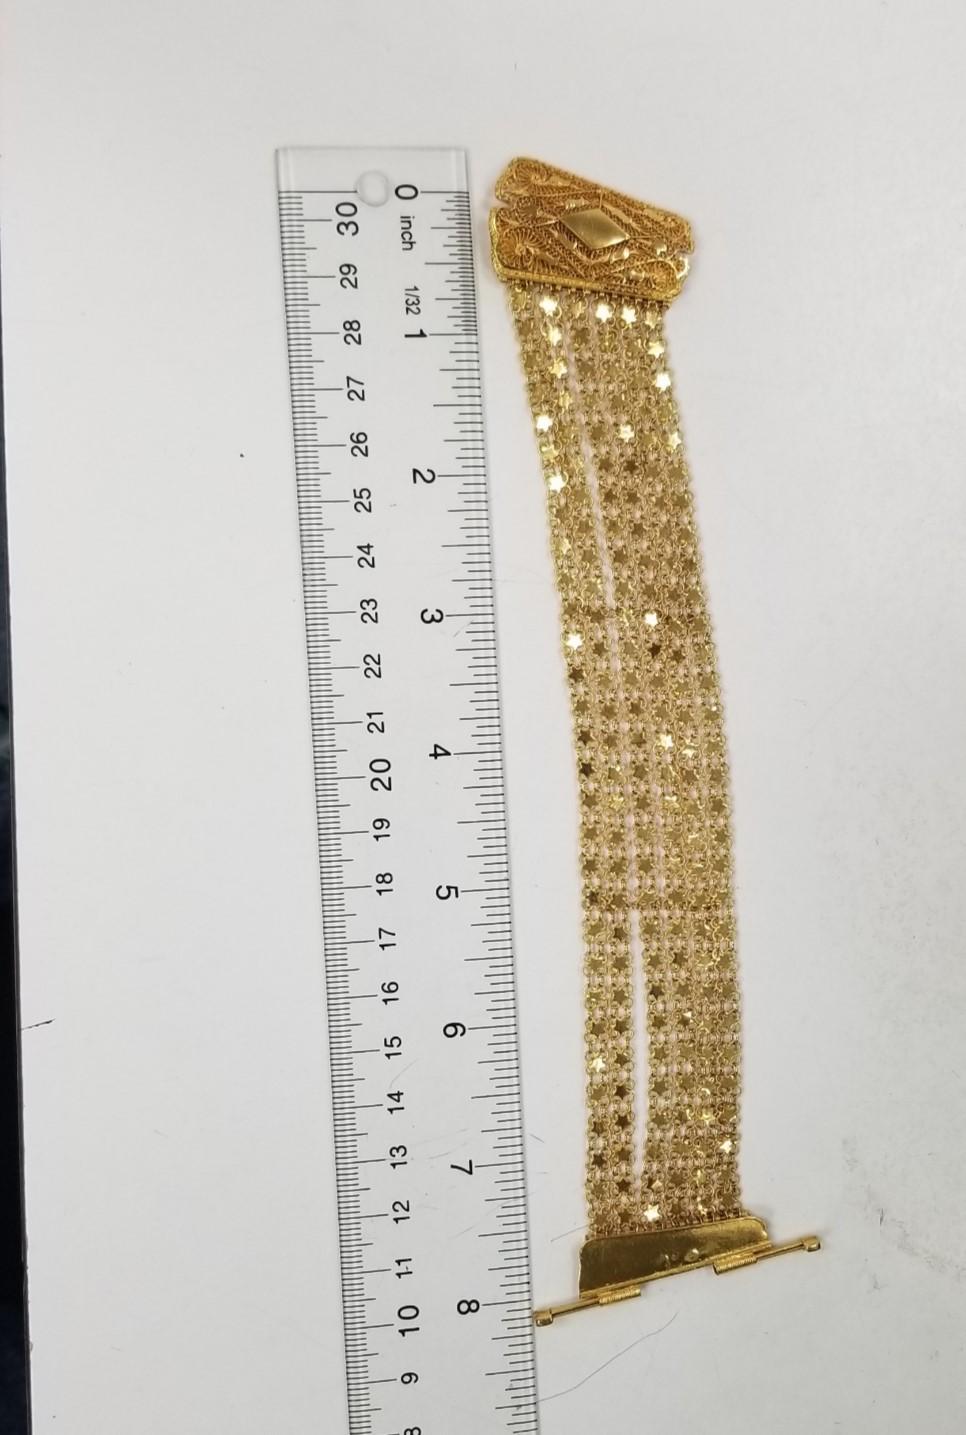 Vintage Geneve 14 Karat Yellow Gold Woven and Rope Bracelet Watch with Tassels .  The watch has 4 adjustments 6 inches -7/5 inches with a safety pin and clasp.  The Watch has a brand new movement.  The width is 26mm and weighs 73 grams. 

*Motivated